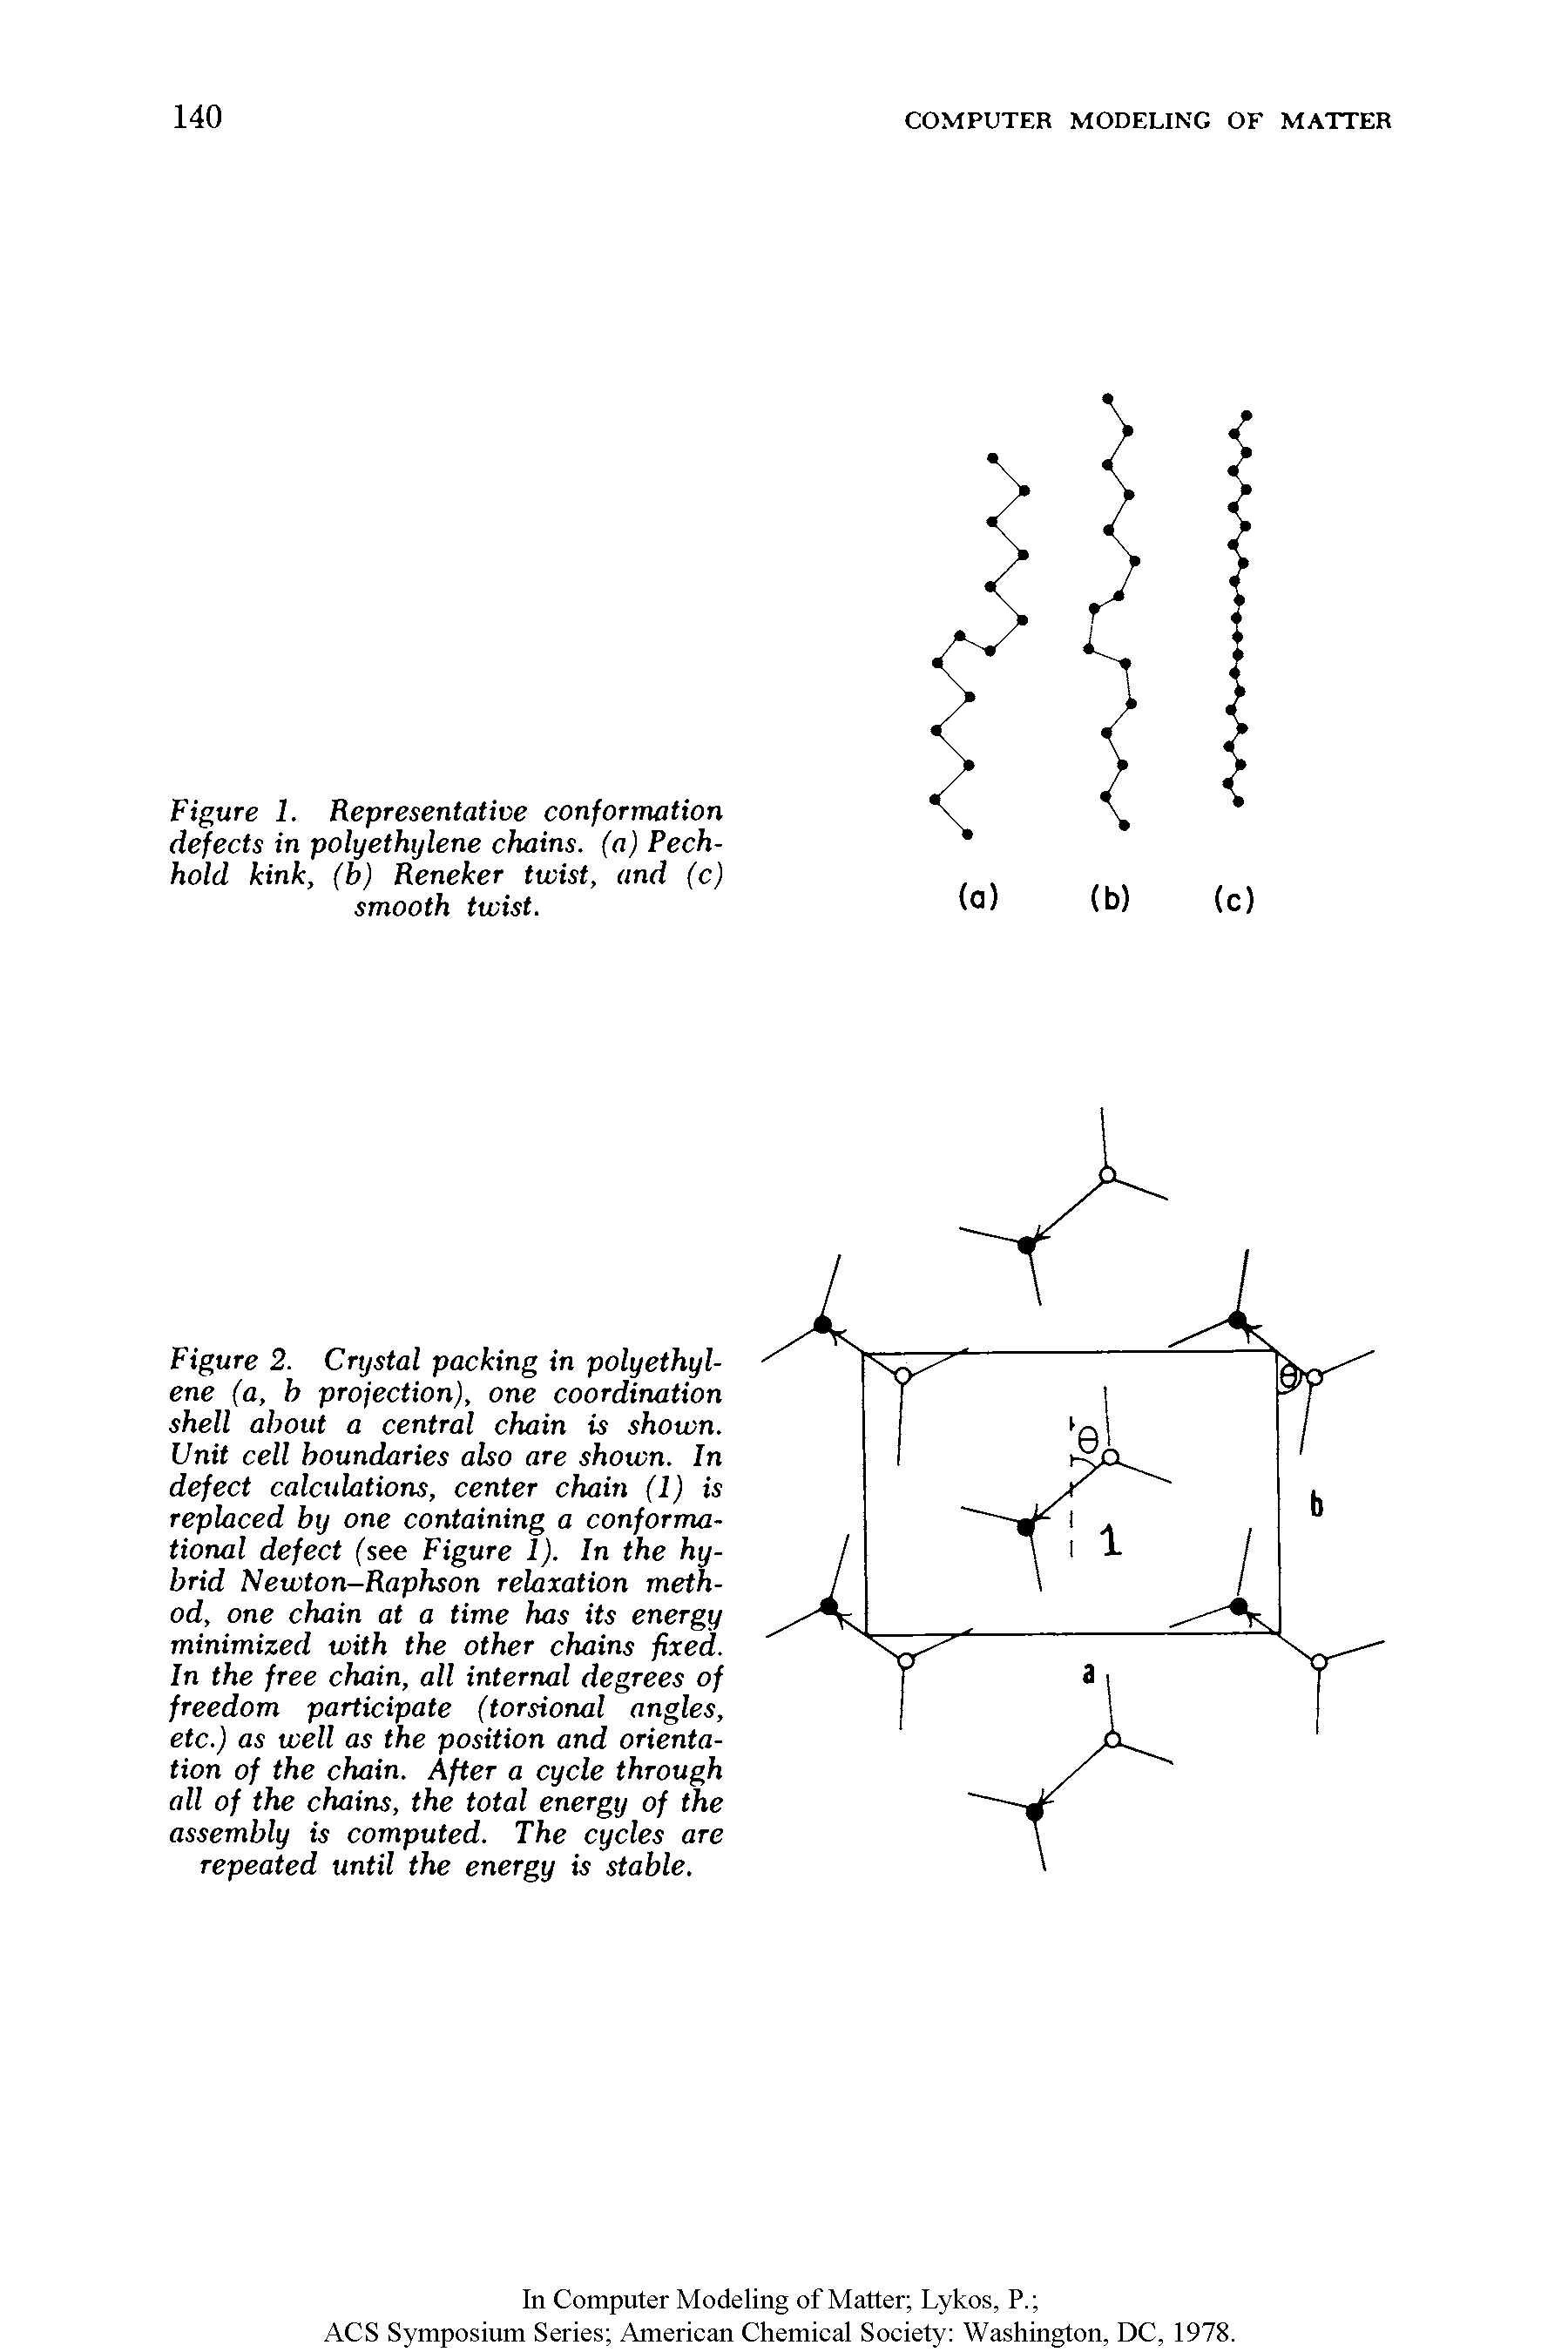 Figure 2. Crystal packing in polyethylene (a, h projection), one coordination shell about a central chain is shown. Unit cell boundaries also are shown. In defect calculations, center chain (1) is replaced by one containing a conformational defect (see Figure 1). In the hybrid Newton-Raphson relaxation method, one chain at a time has its energy minimized with the other chains fixed. In the free chain, all internal degrees of freedom participate (torsional angles, etc.) as well as the position and orientation of the chain. After a cycle through all of the chains, the total energy of the assembly is computed. The cycles are repeated until the energy is stable.